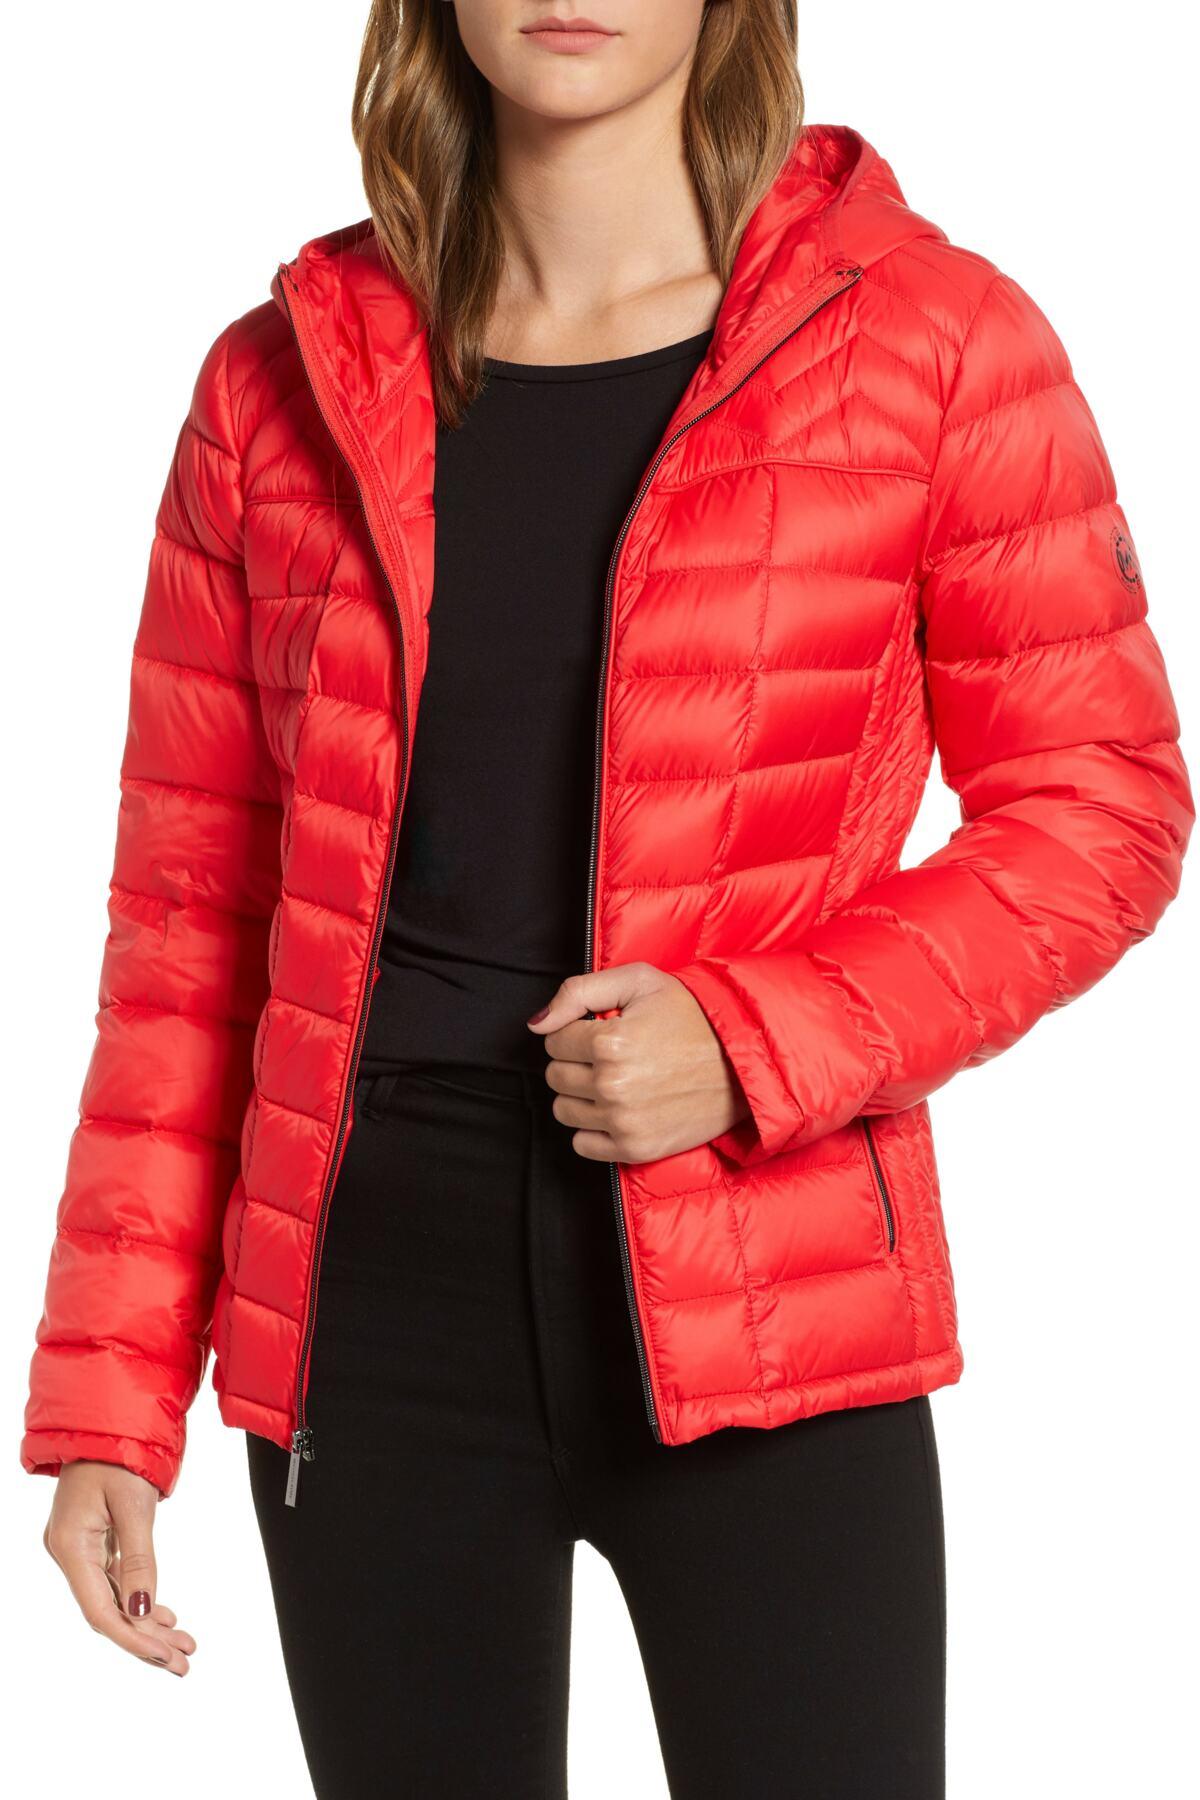 MICHAEL Michael Kors Packable Down Puffer Jacket in Red | Lyst